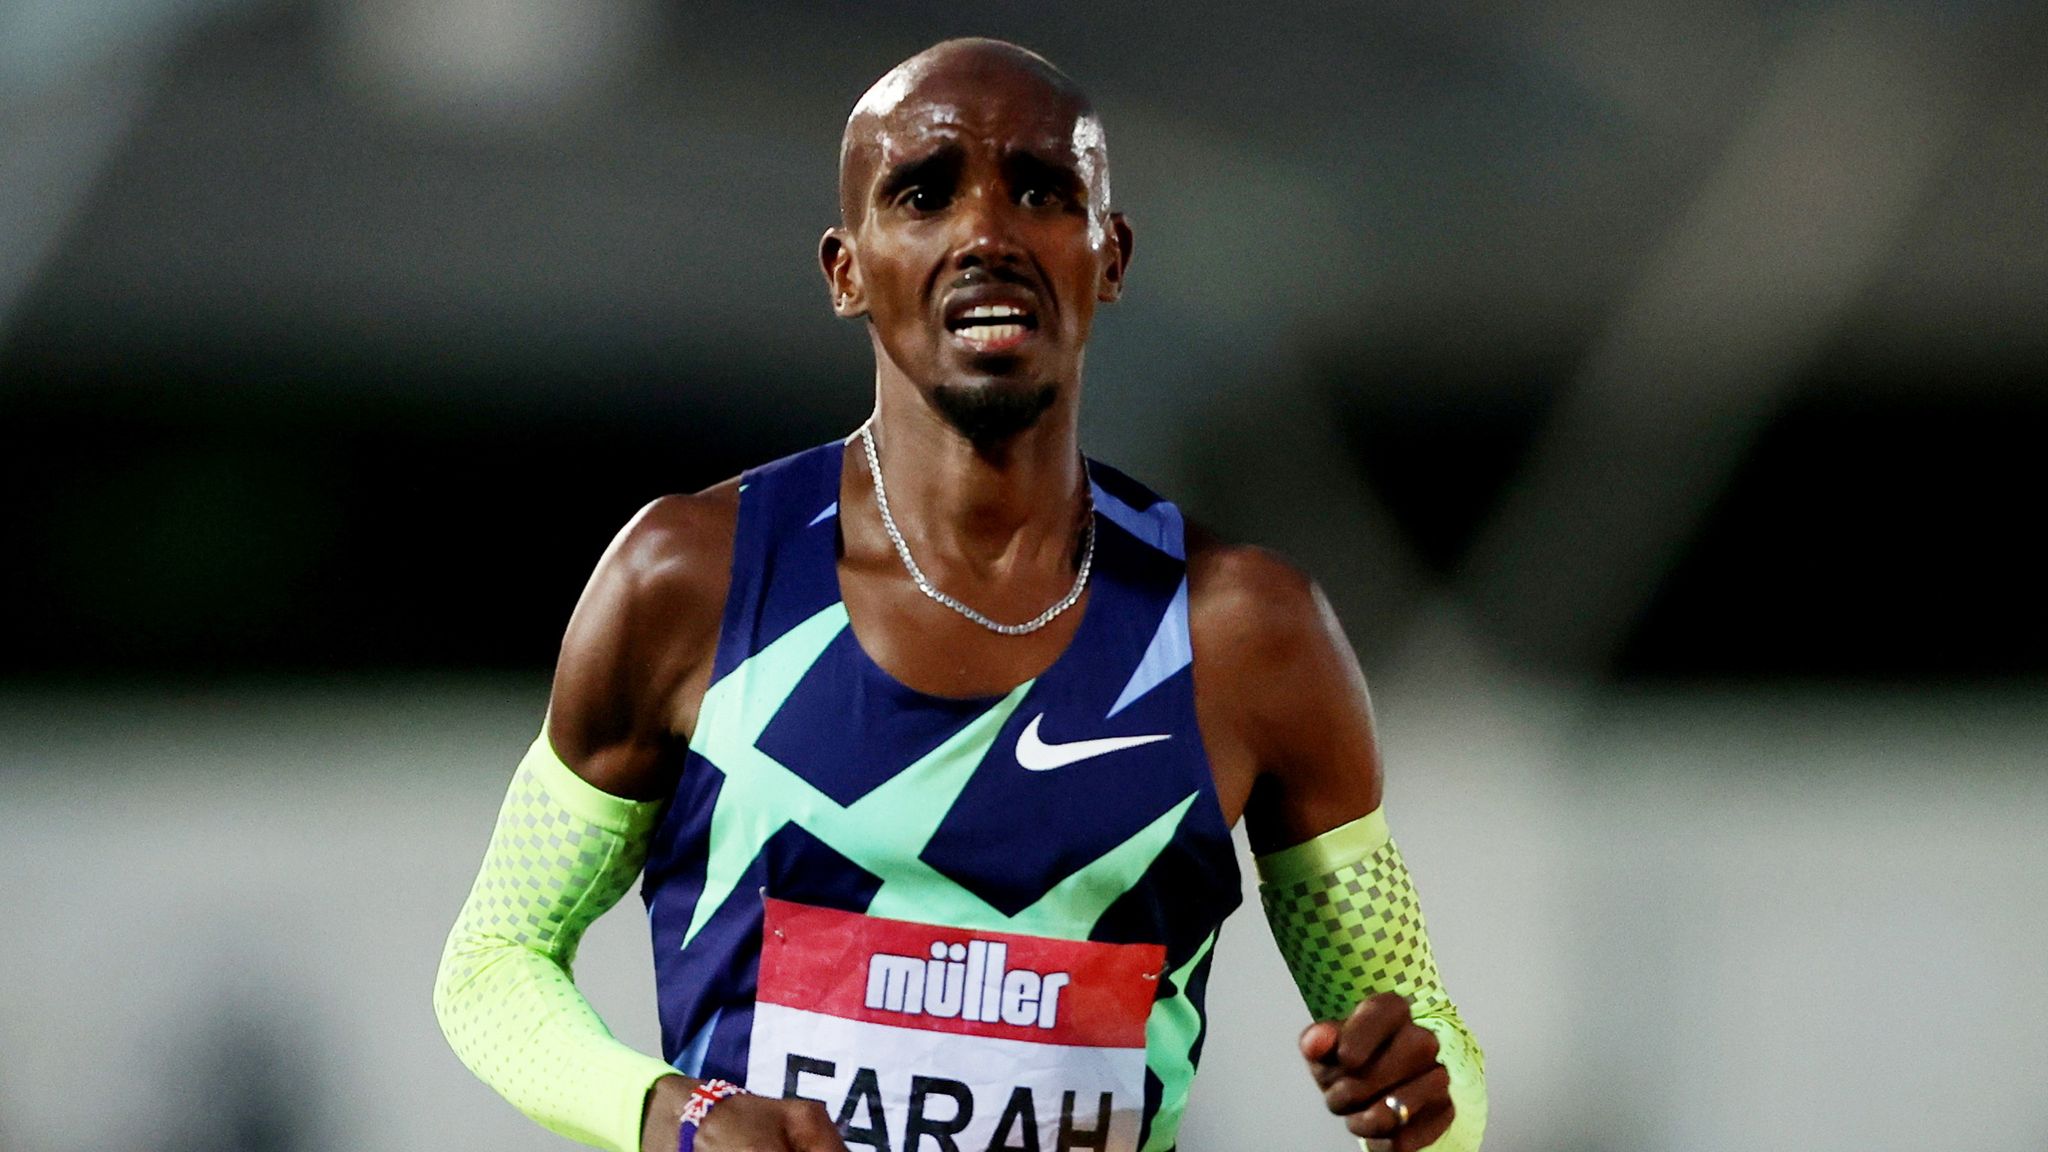 Sir Mo Farah fails to qualify for Tokyo Olympics 2021 after missing 10,000m  race time | UK News | Sky News